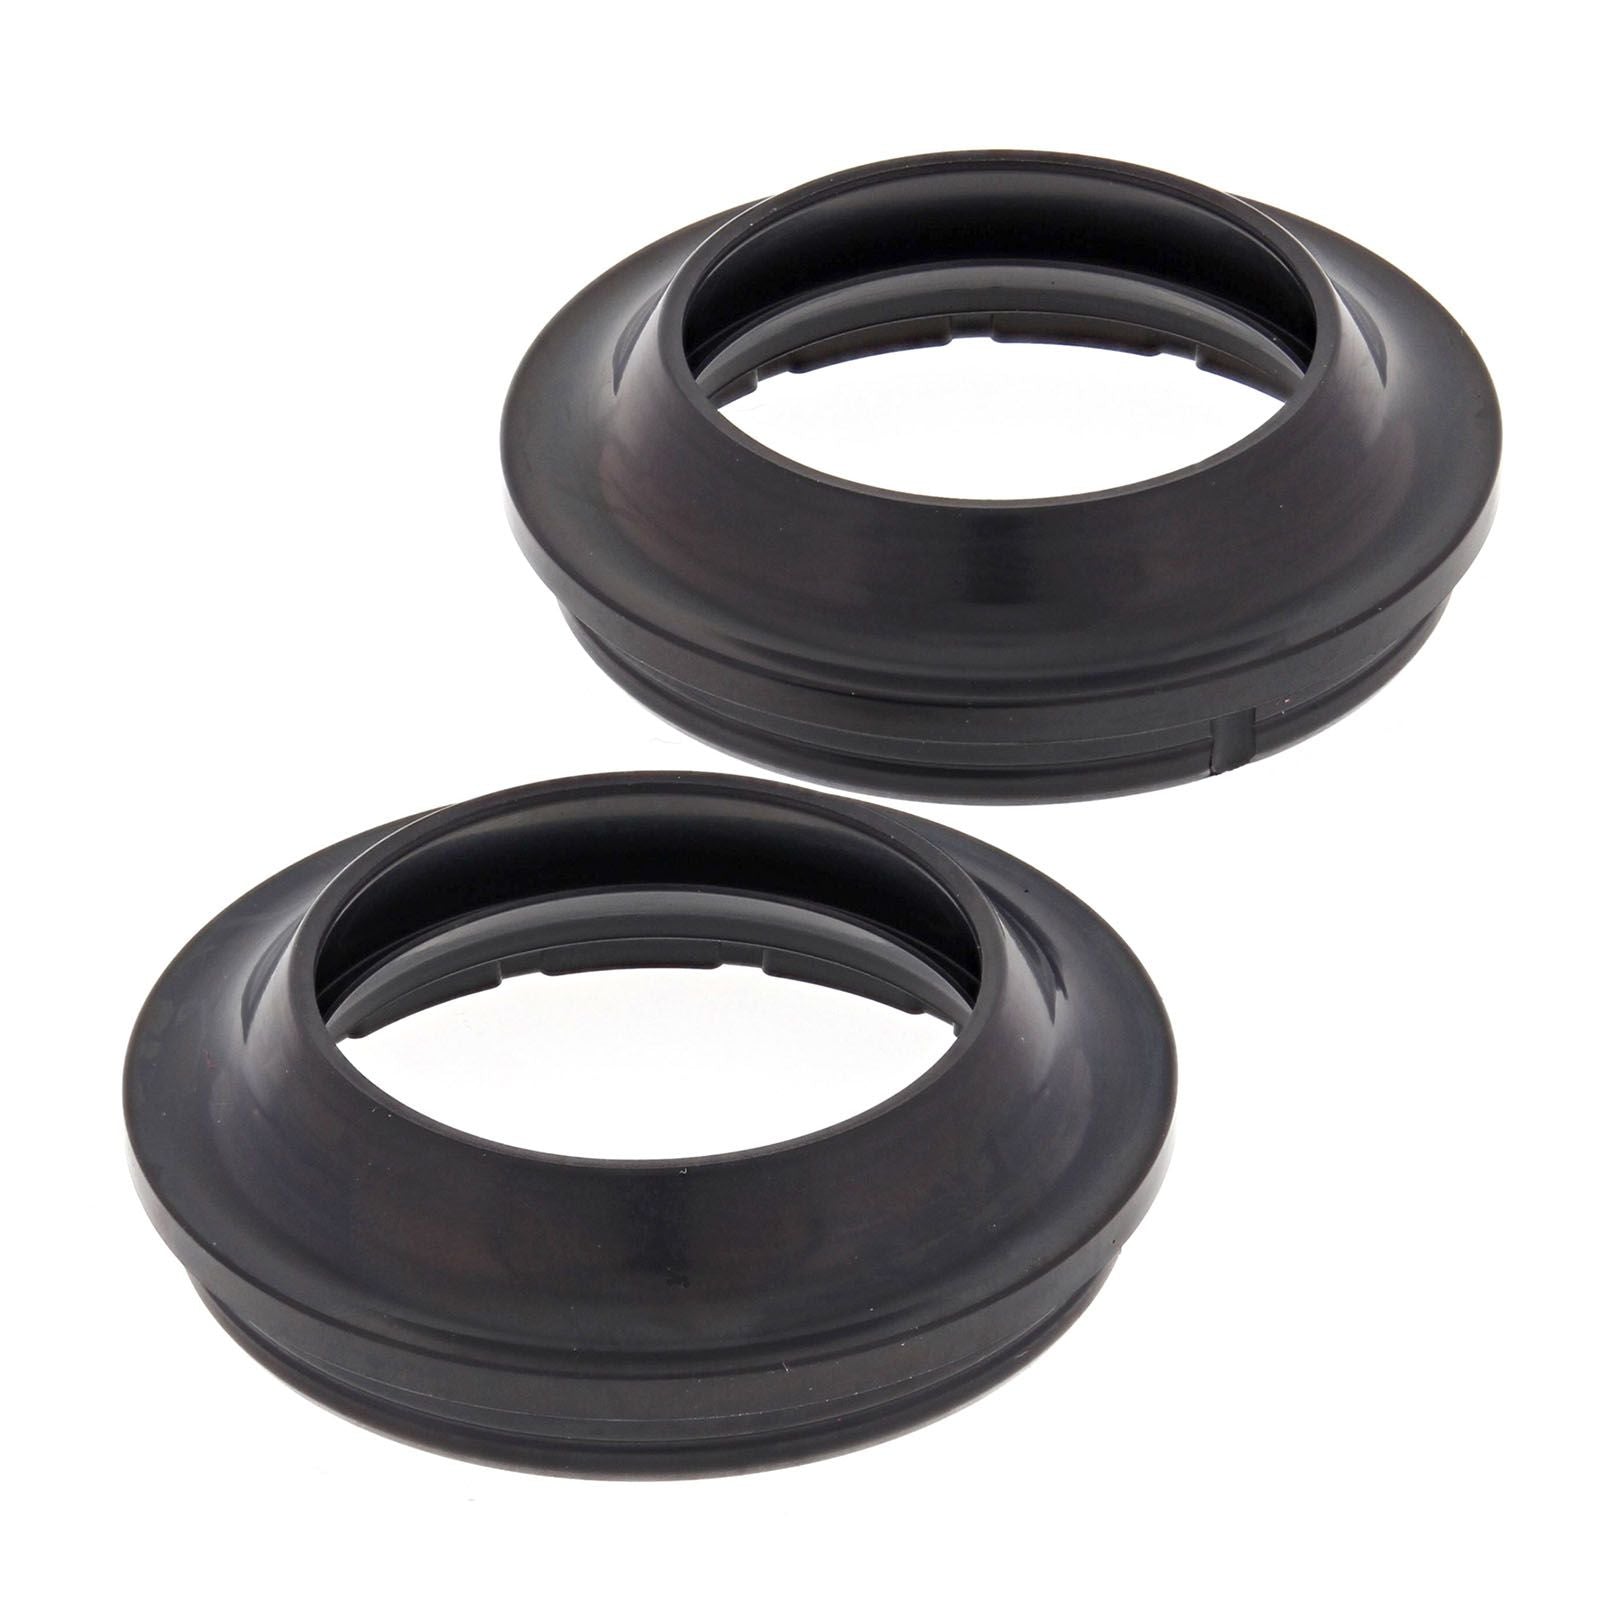 New ALL BALLS Racing Fork Dust Seal Kit #AB57144